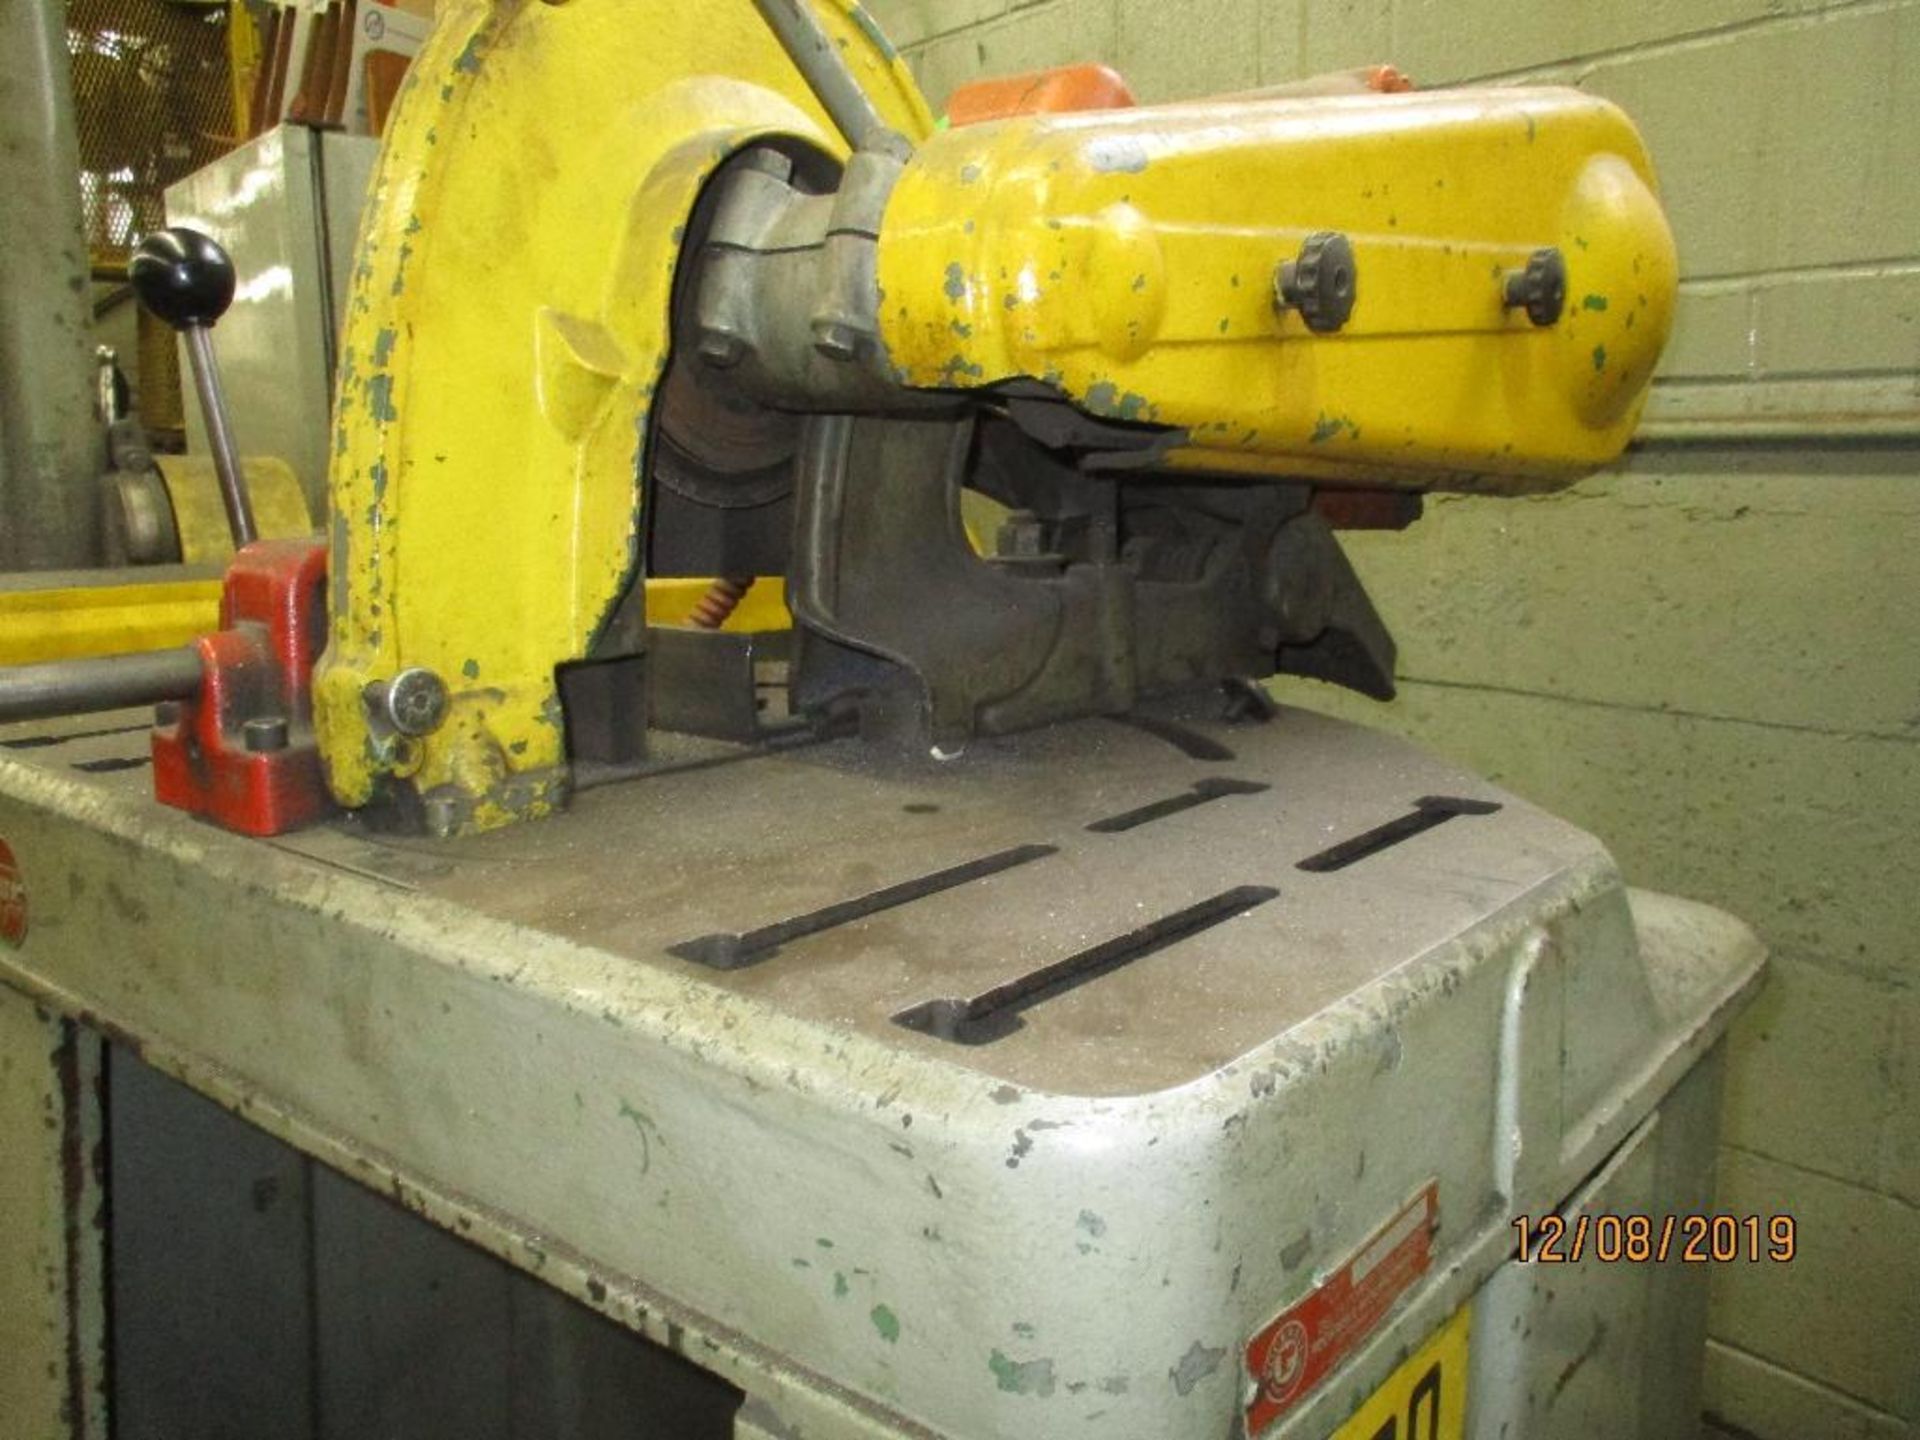 Delta Rockwell 10" Chopsaw, 3hp S/N 114-2358 - Image 3 of 4